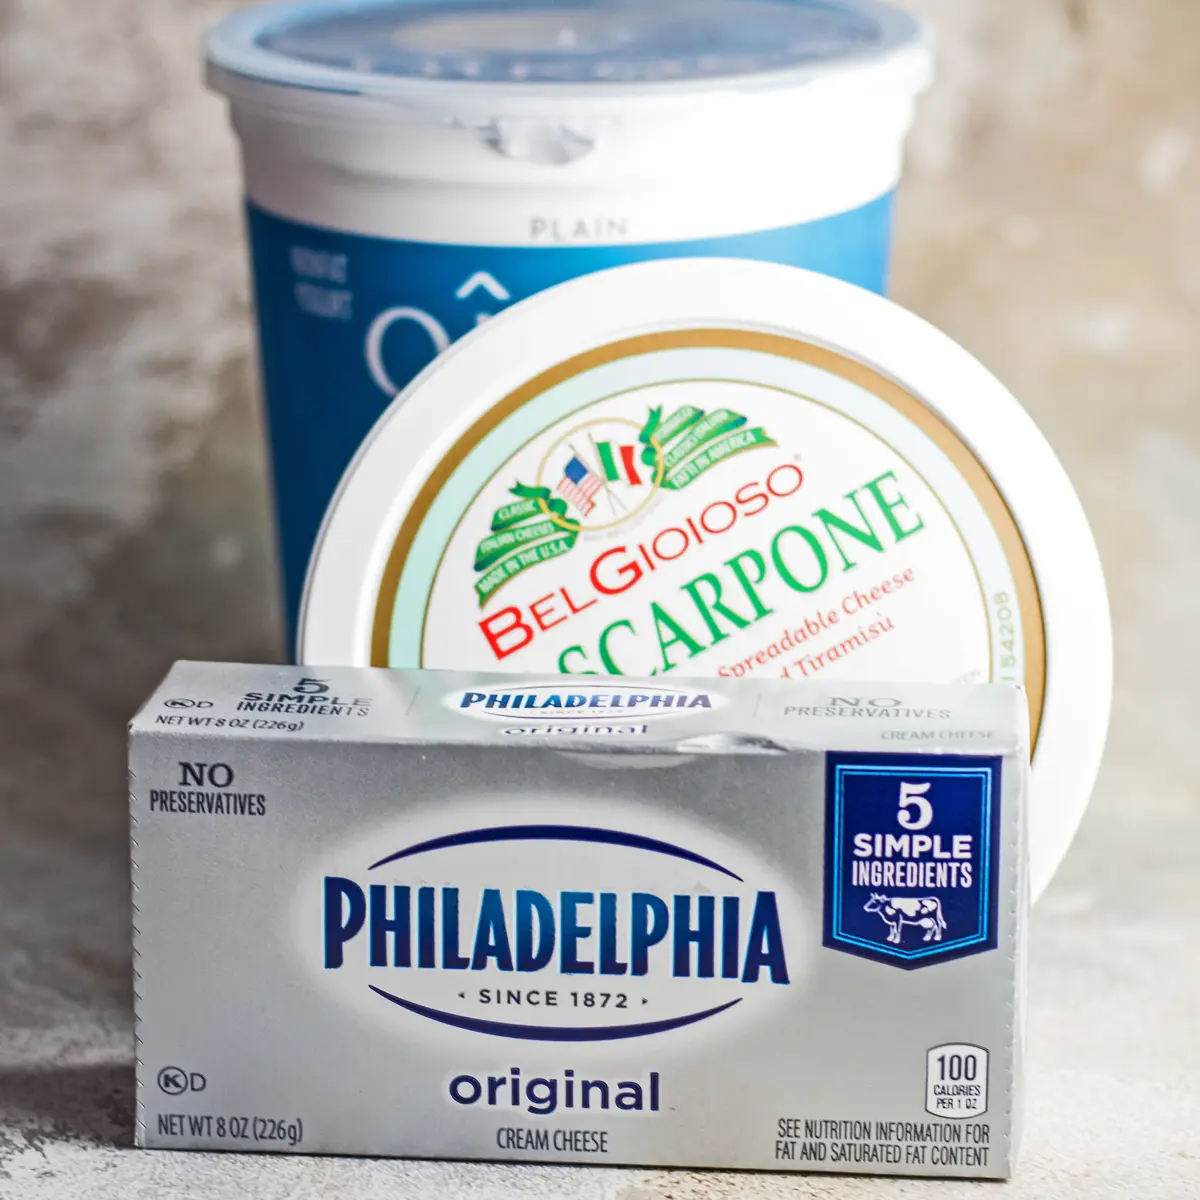 Large square image of cream cheese and my favorite substitutes.